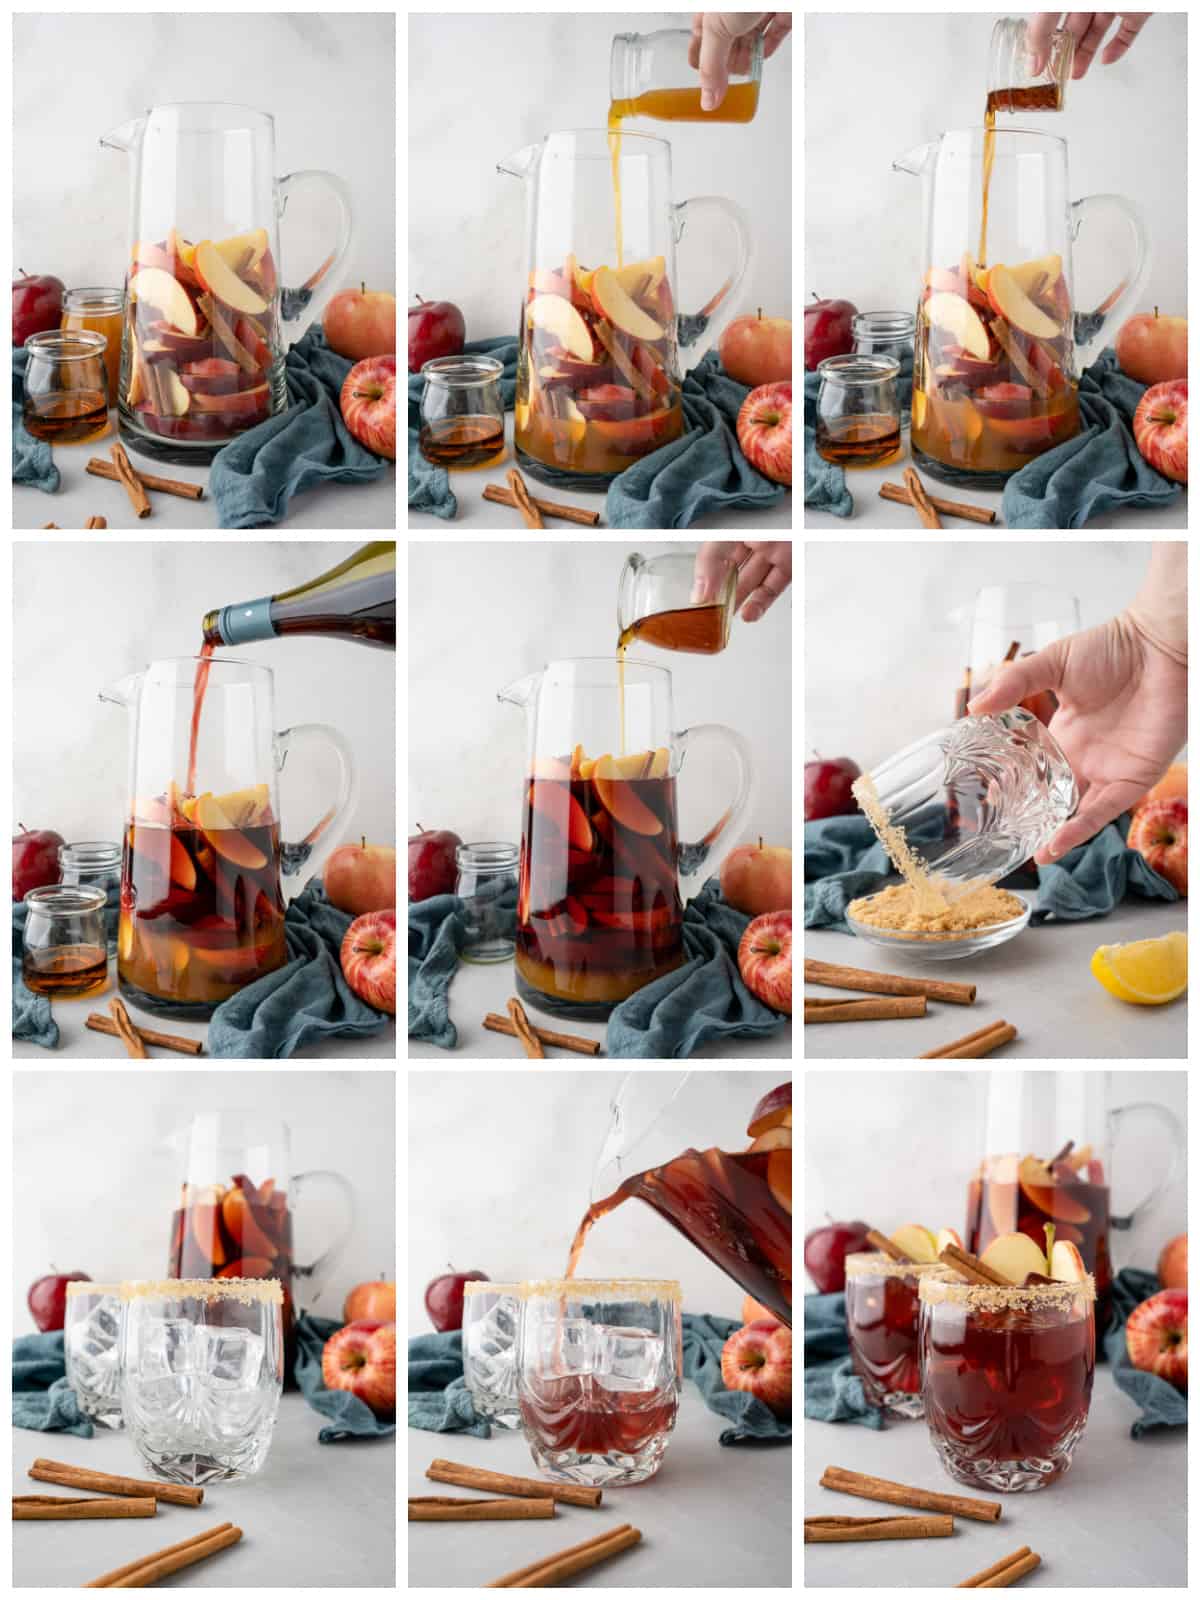 Step by step photos on how to make Apple Cider Sangria.